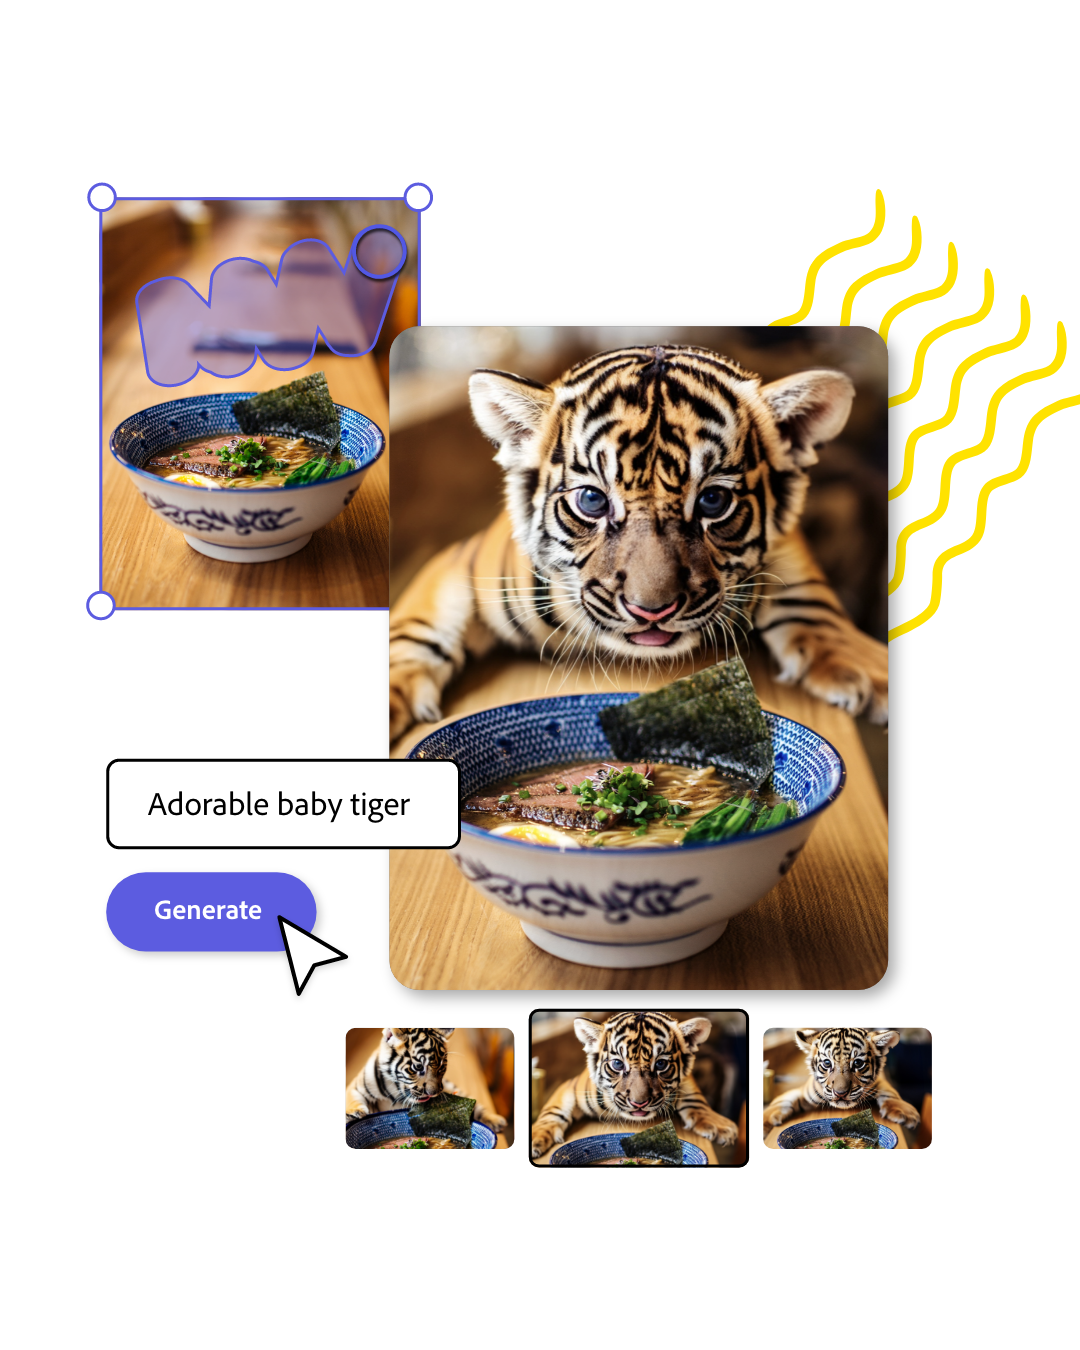 A collage of a baby tiger and a bowl of soup, with button and stylized elements indicating a digital creation process